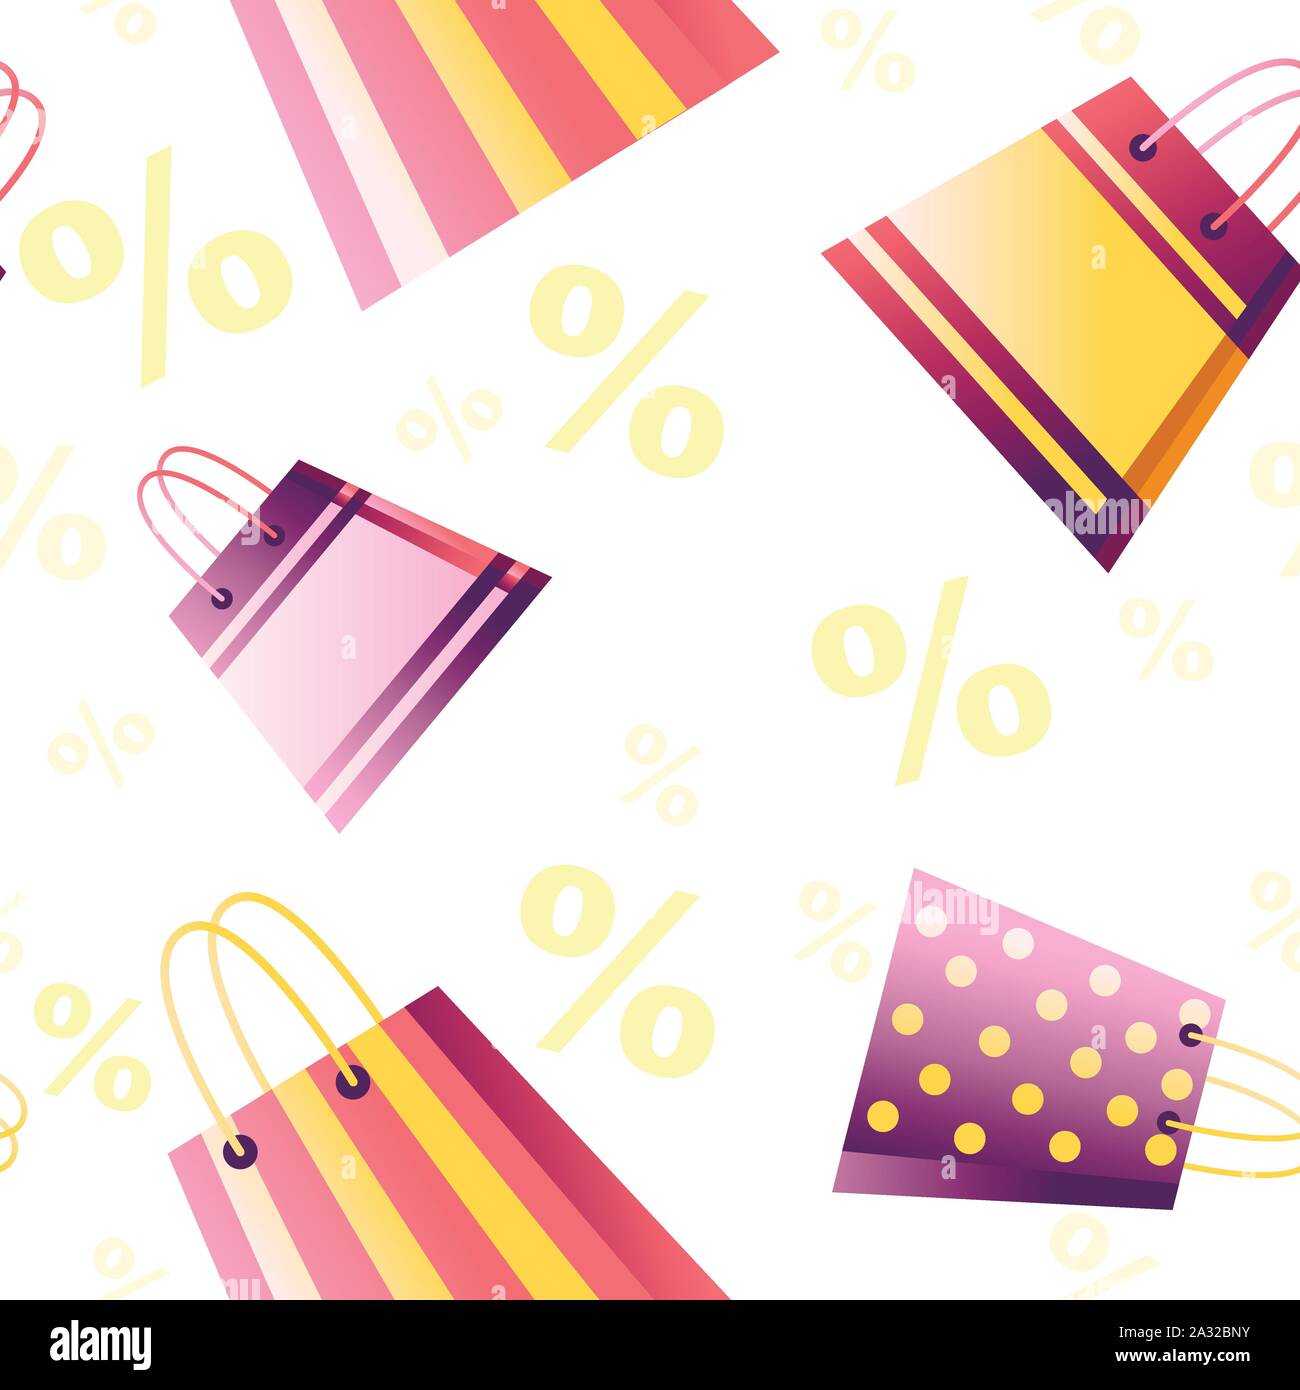 Seamless pattern of shopping paper bag with sale tag % flat vector illustration on white background with percentage symbol. Stock Vector